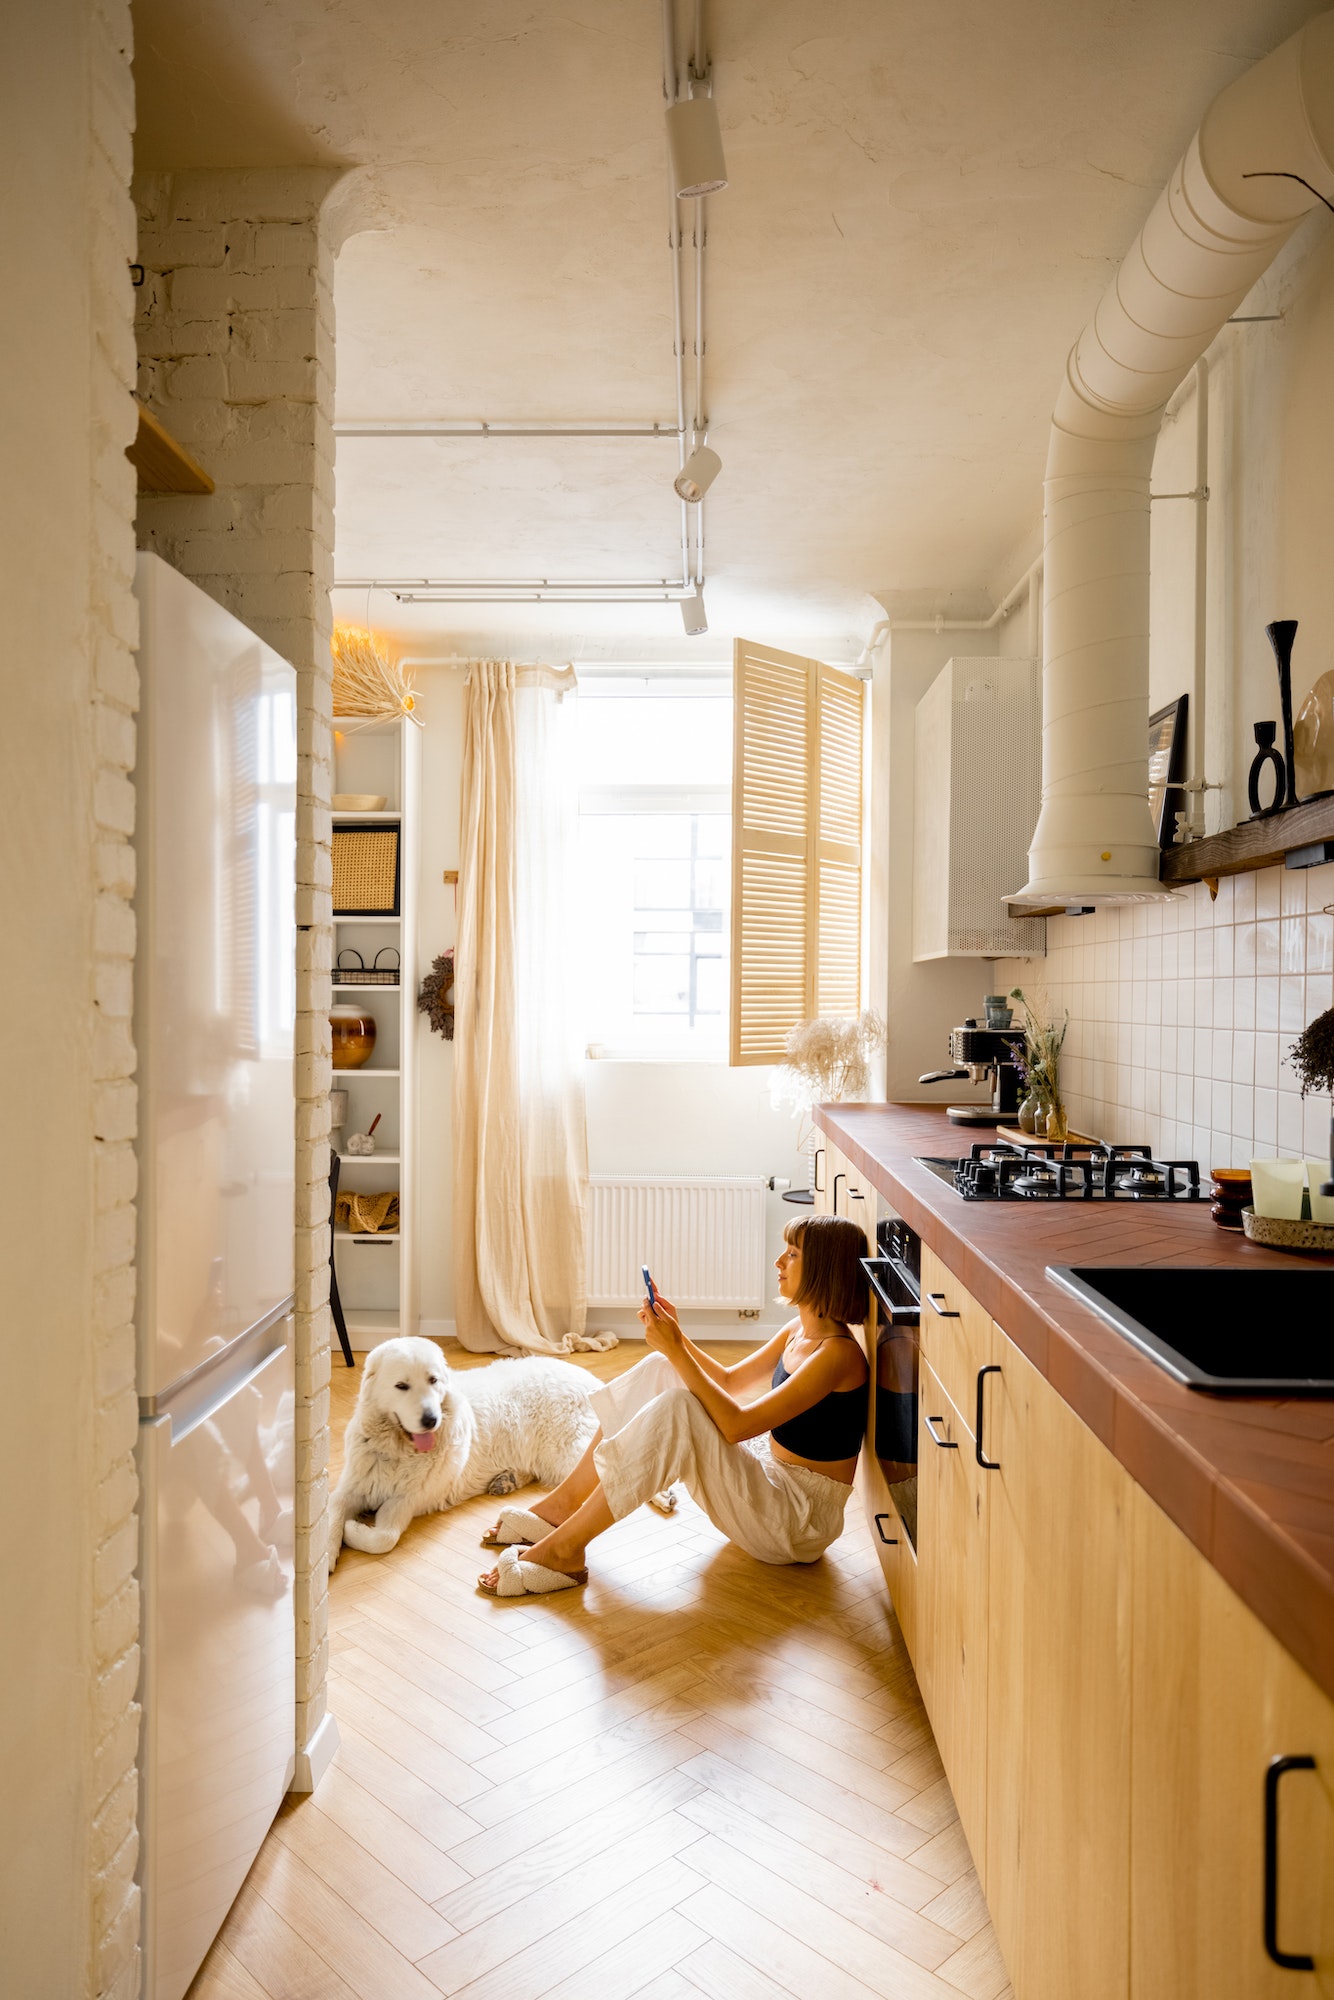 Woman with dog in modern and stylish kitchen